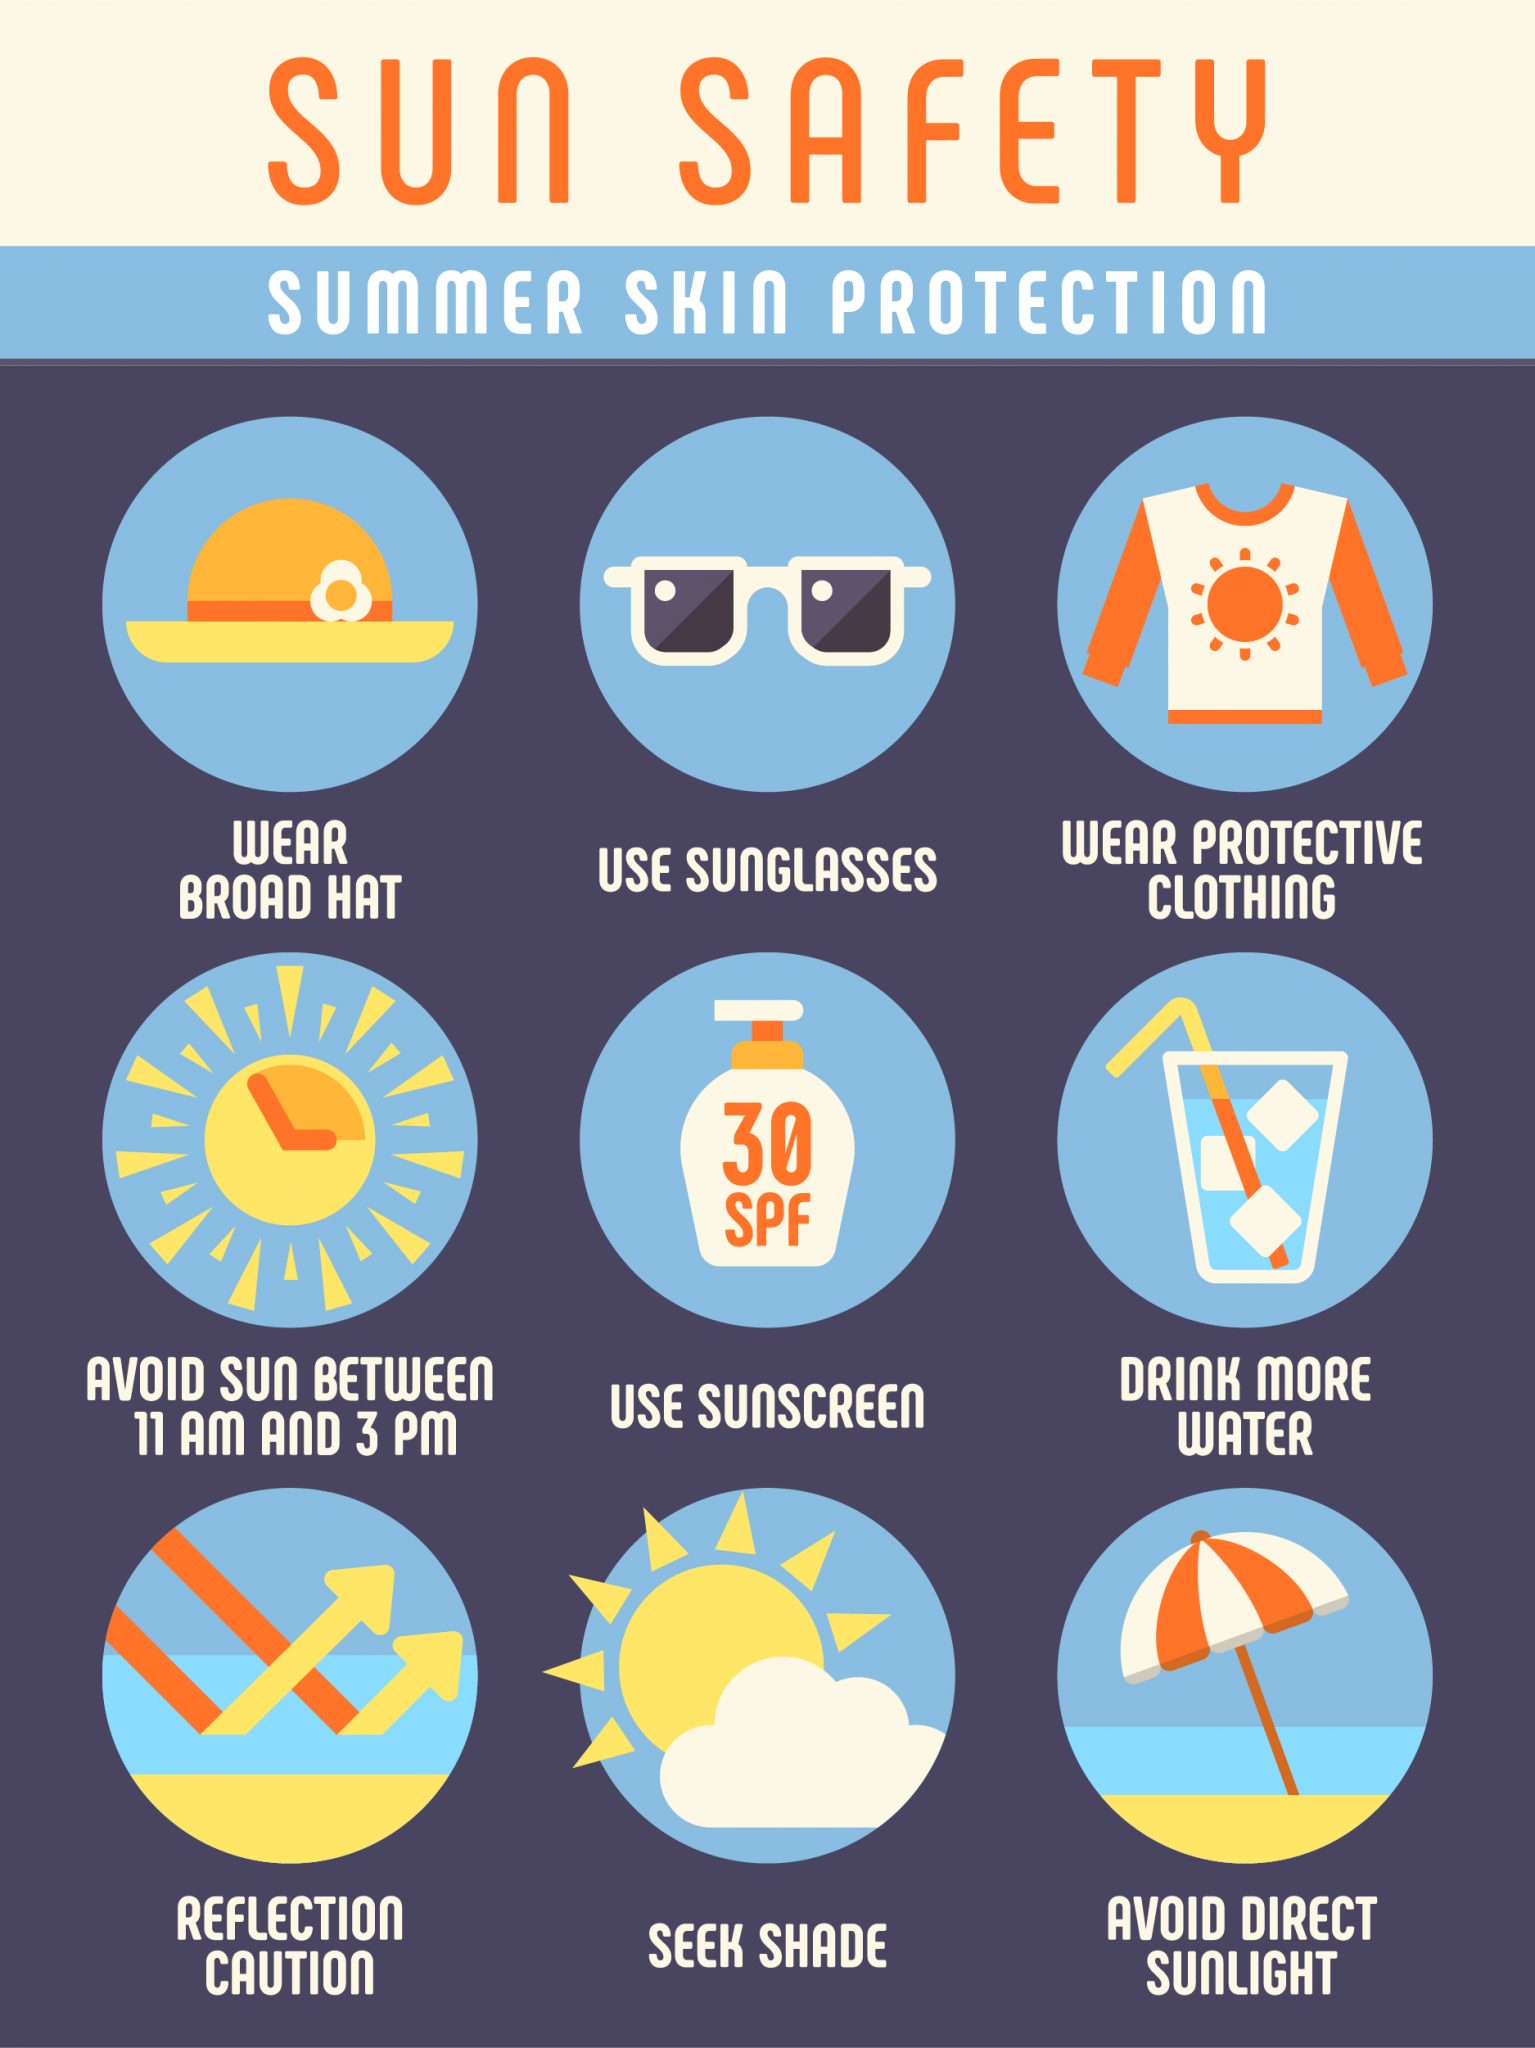 Sun safety infographic with nice points on skin protection